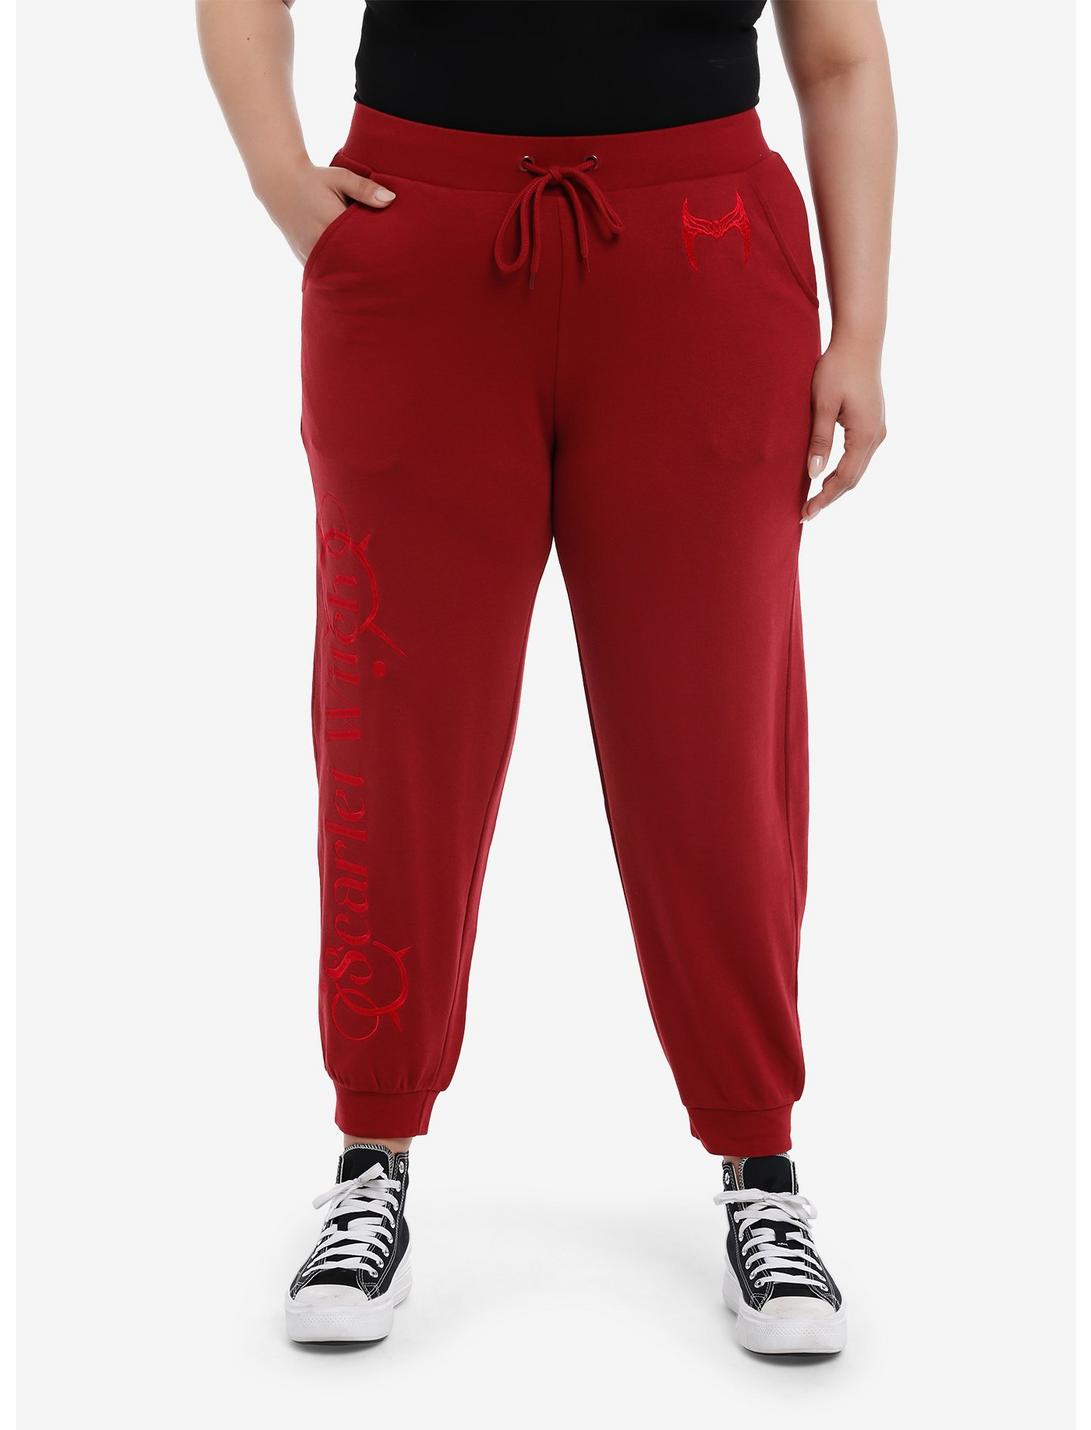 Her Universe Marvel Scarlet Witch Tiara Jogger Pants Plus Size Her Universe Exclusive, BURGUNDY, hi-res